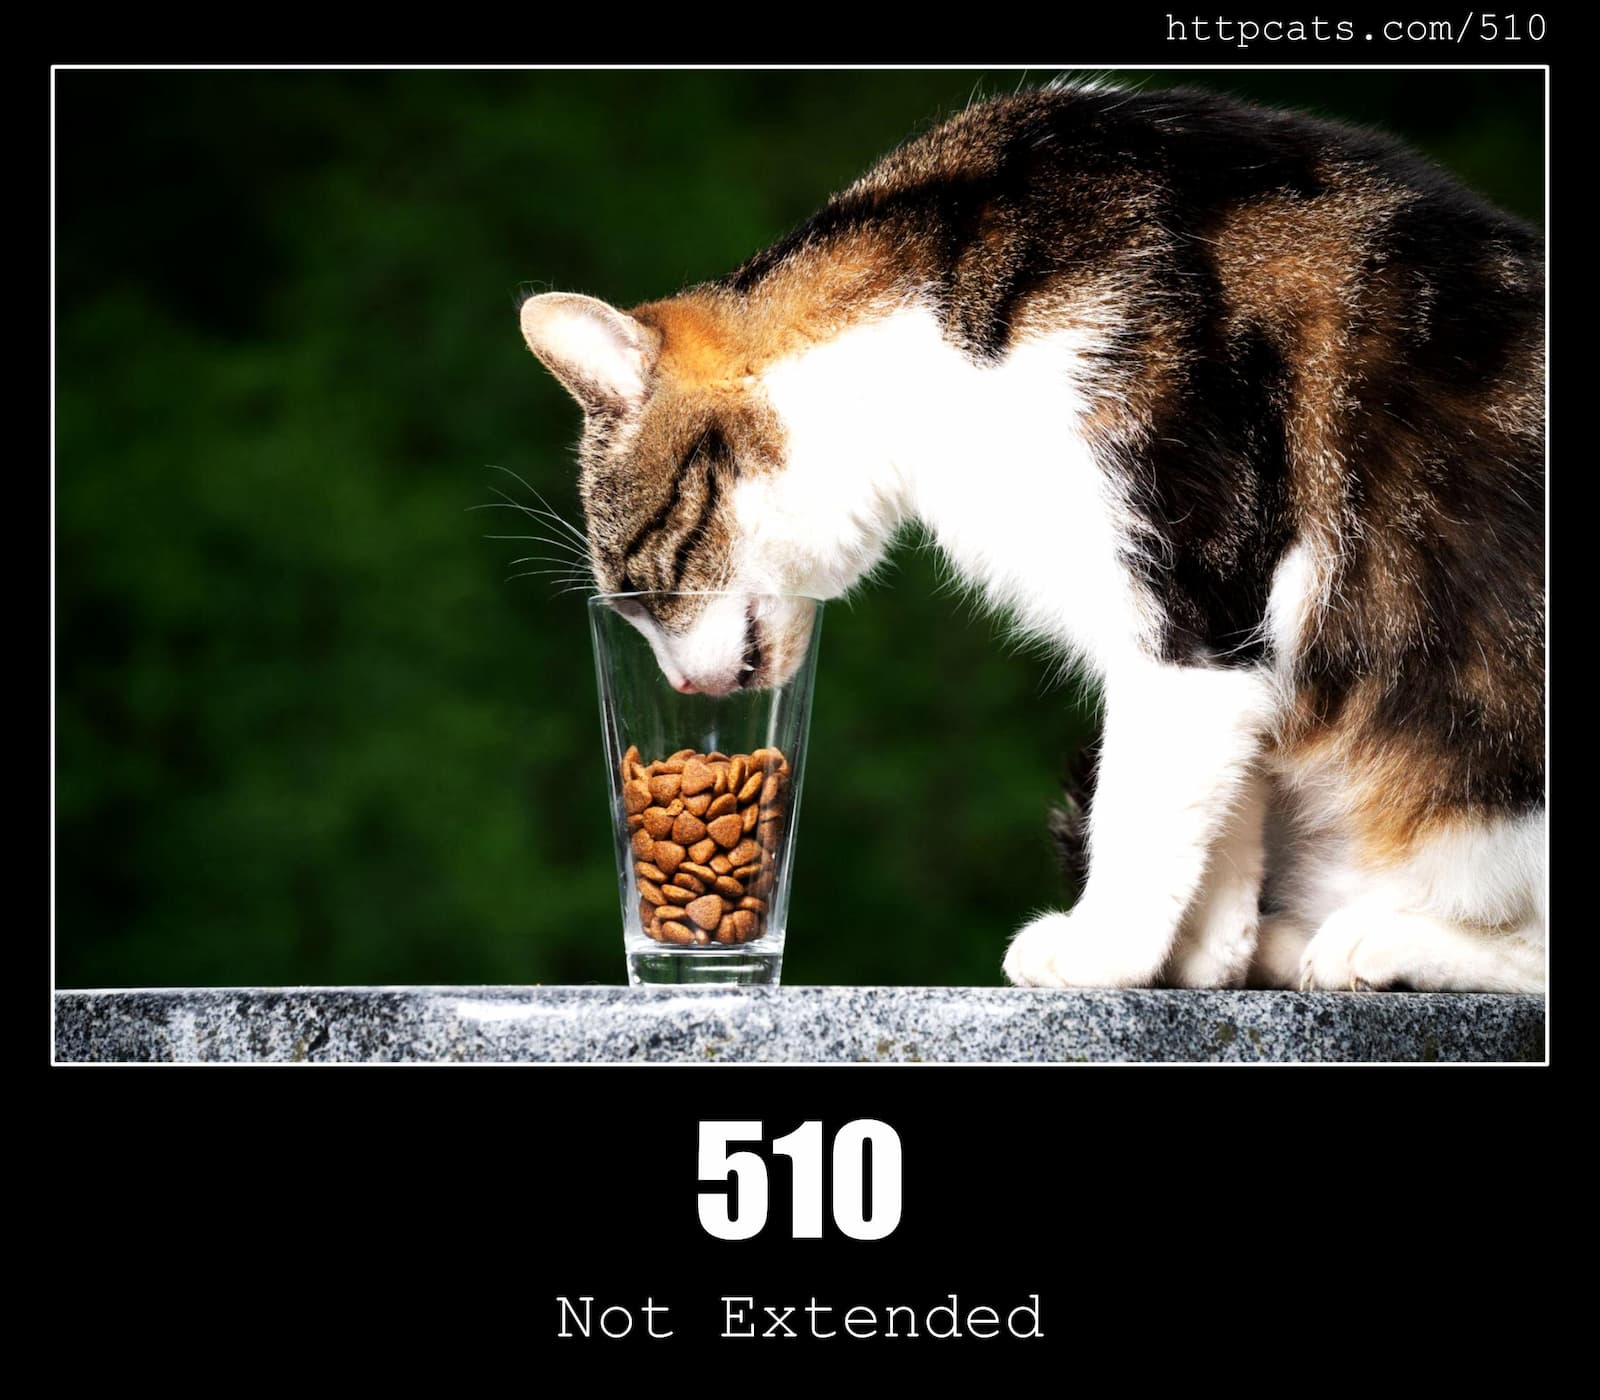 HTTP Status Code 510 Not Extended & Cats